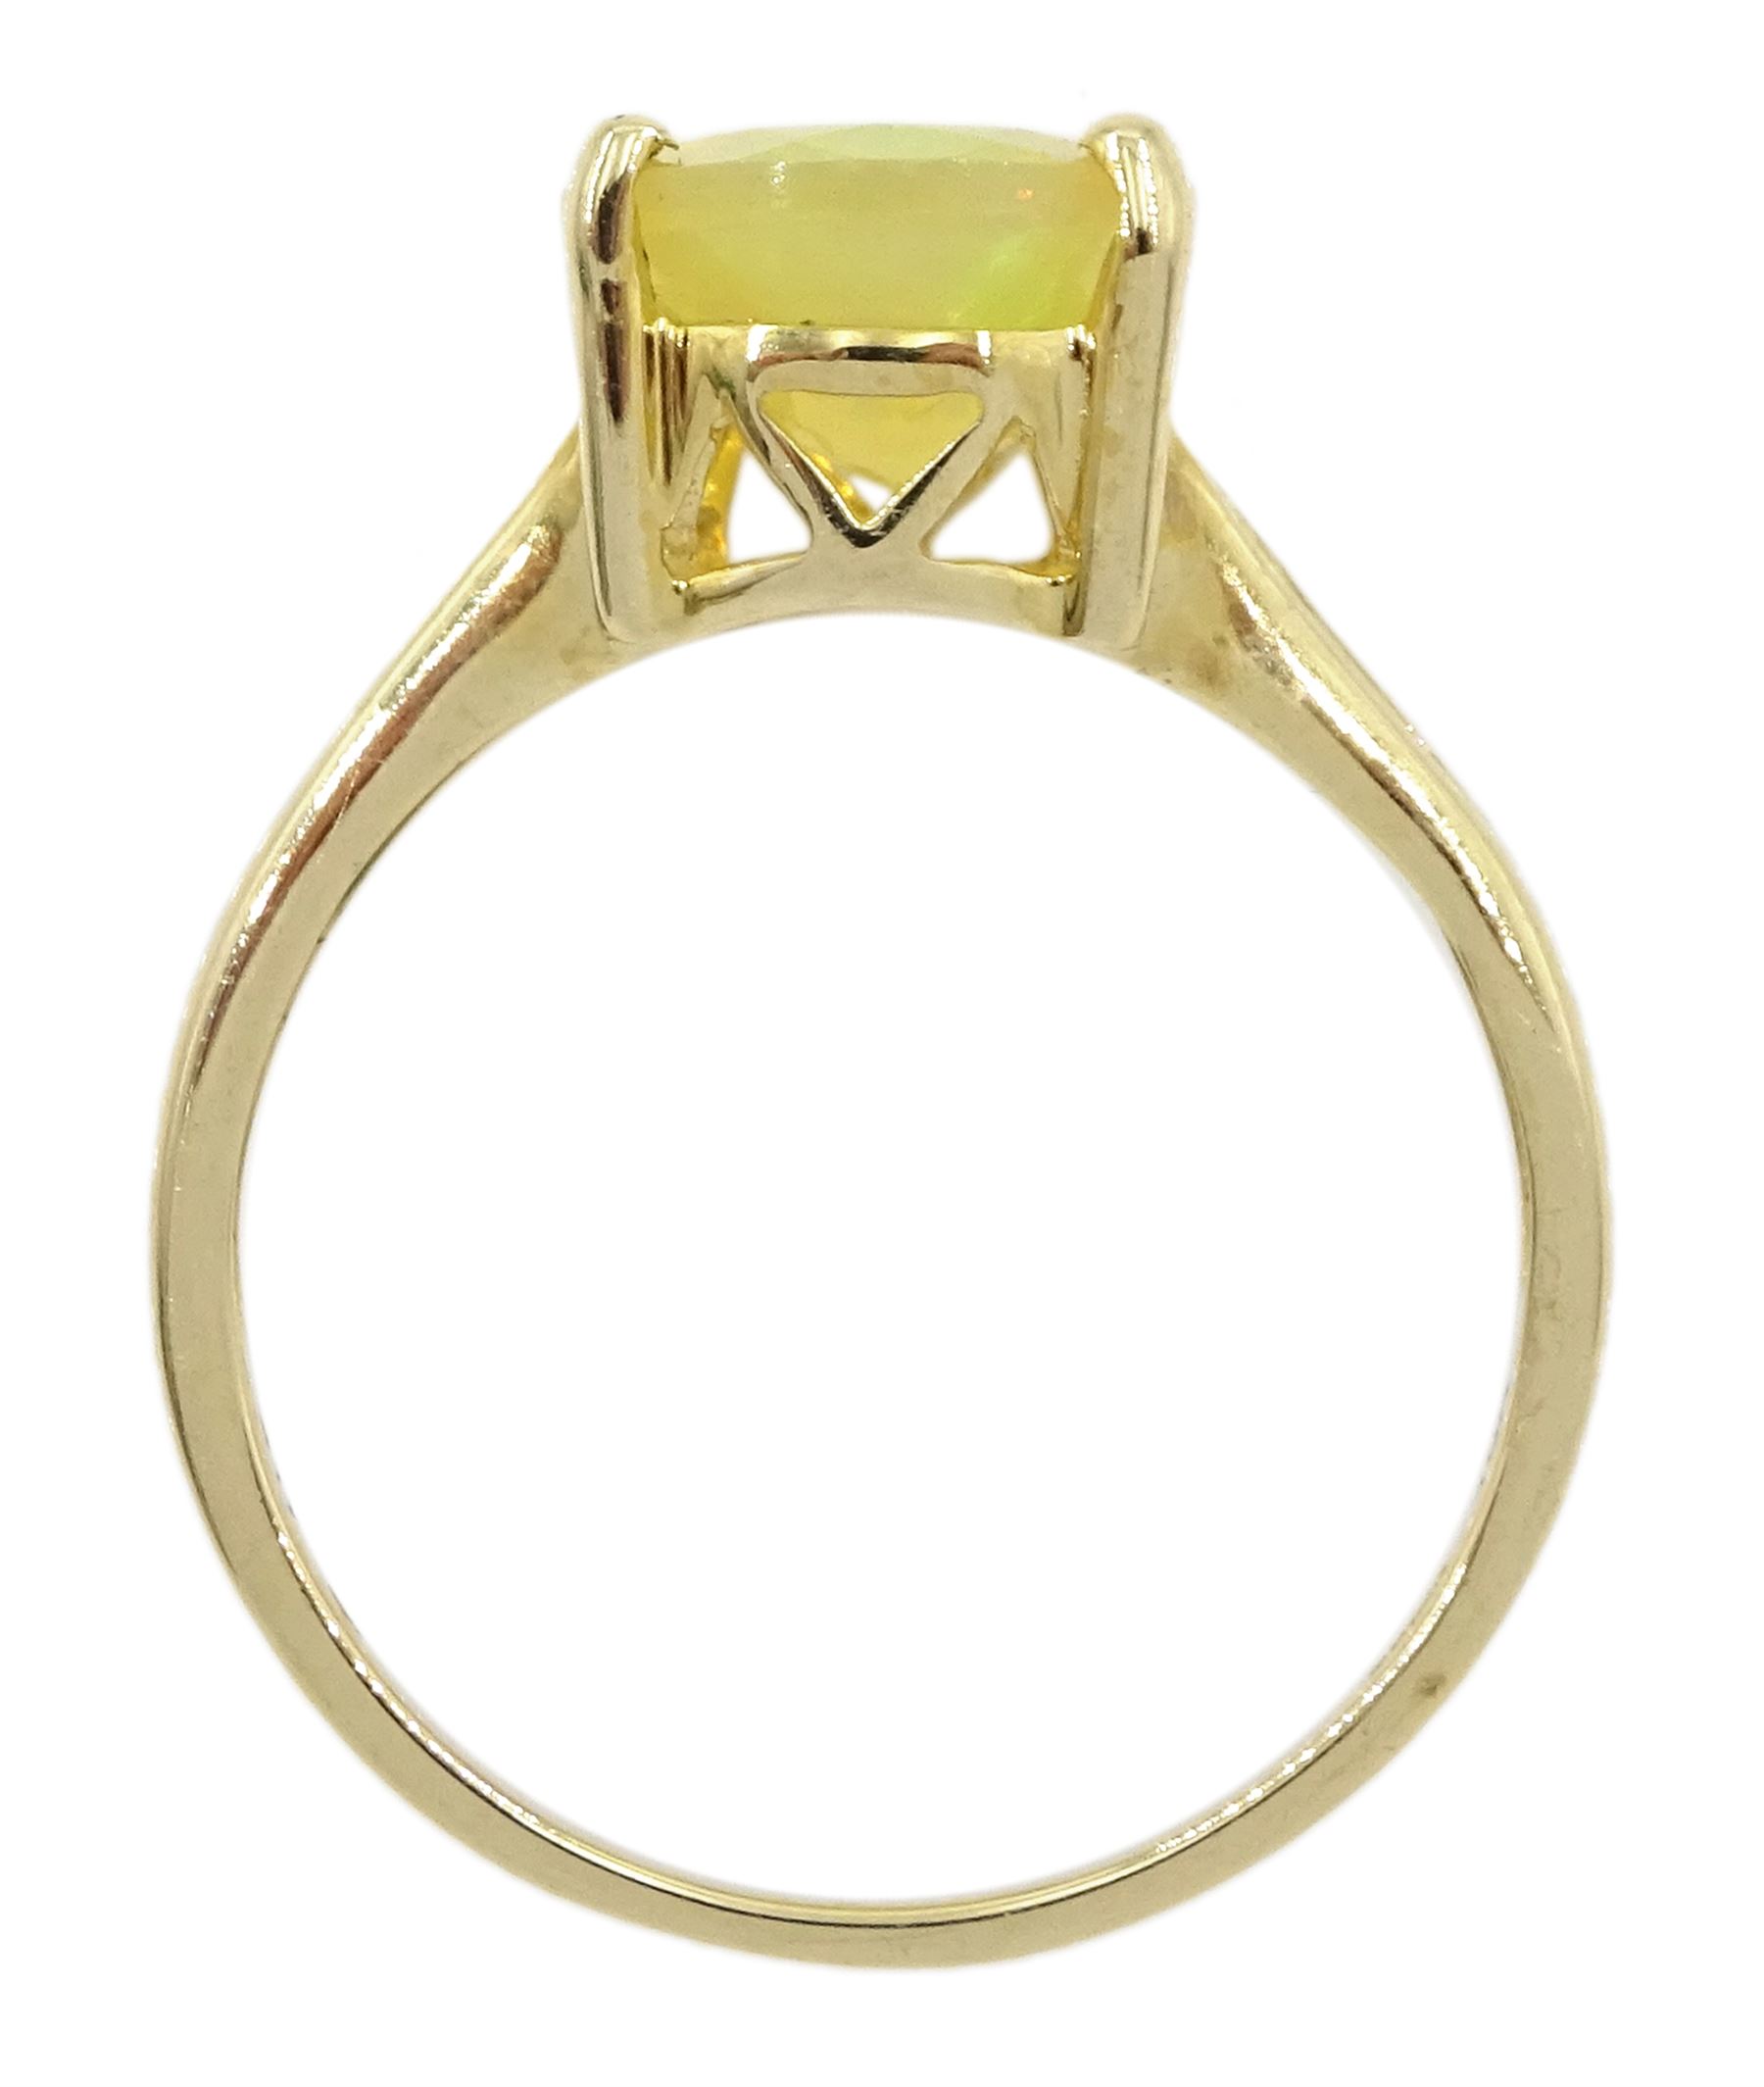 9ct gold single stone opal ring - Image 4 of 5